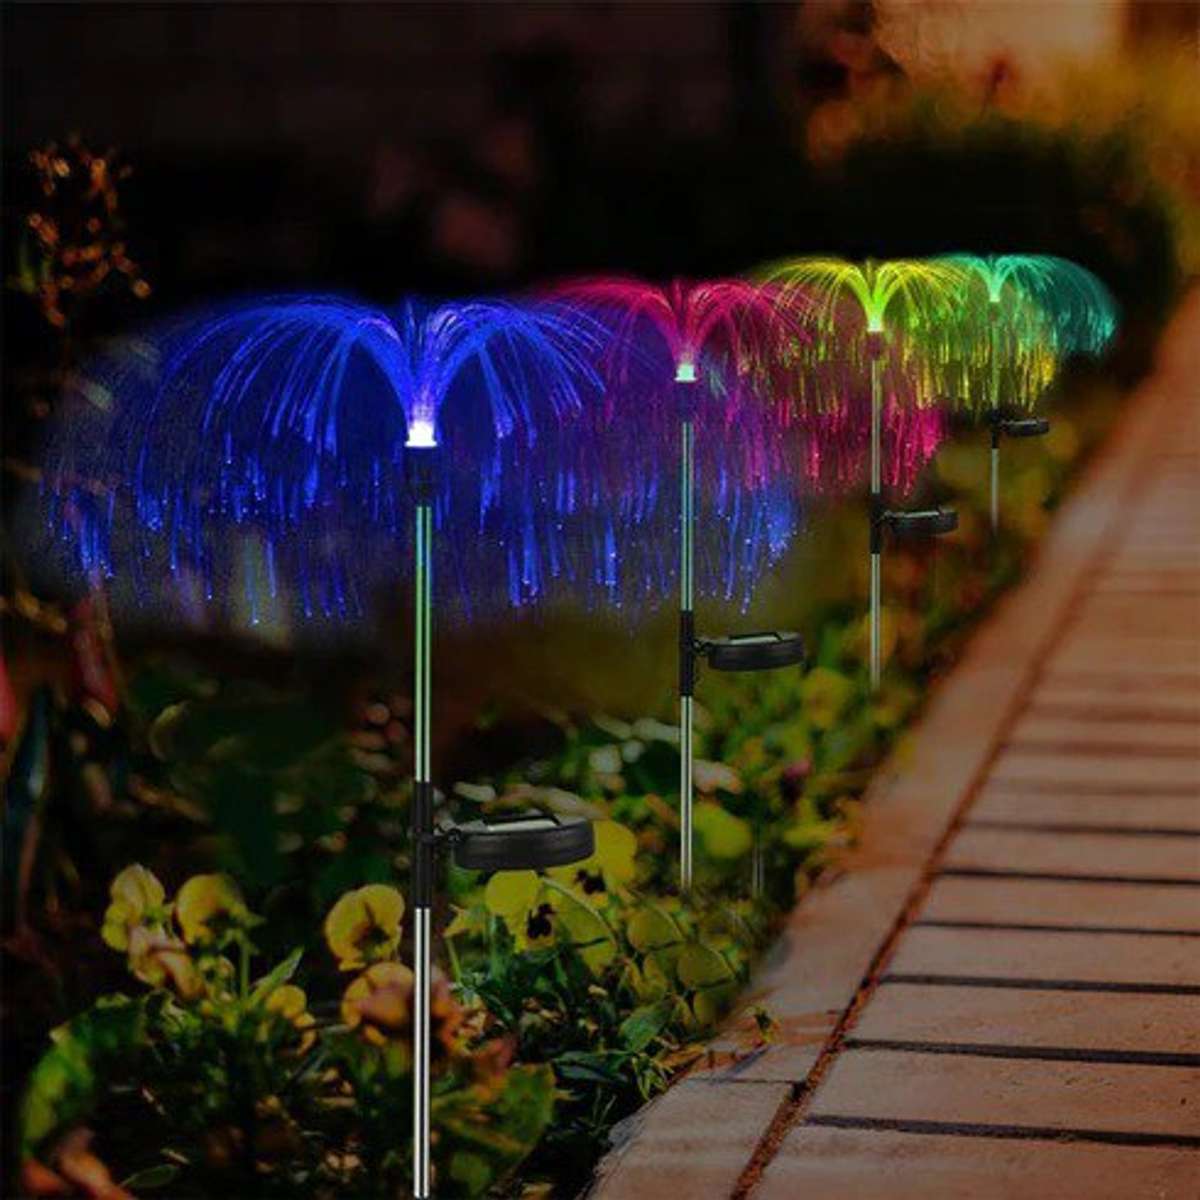 2PCS GARDEN SOLAR OUTDOOR LIGHTS DECORATIVE , 7 COLORS CHANGING RGB LIGHT WATERPROOF FLOWER JELLYFISH FIREWORK DECOR FOR GARDEN PATIO LANDSCAPE PATHWAY YARD HOLIDAY DECOR

Rs. 1530.00